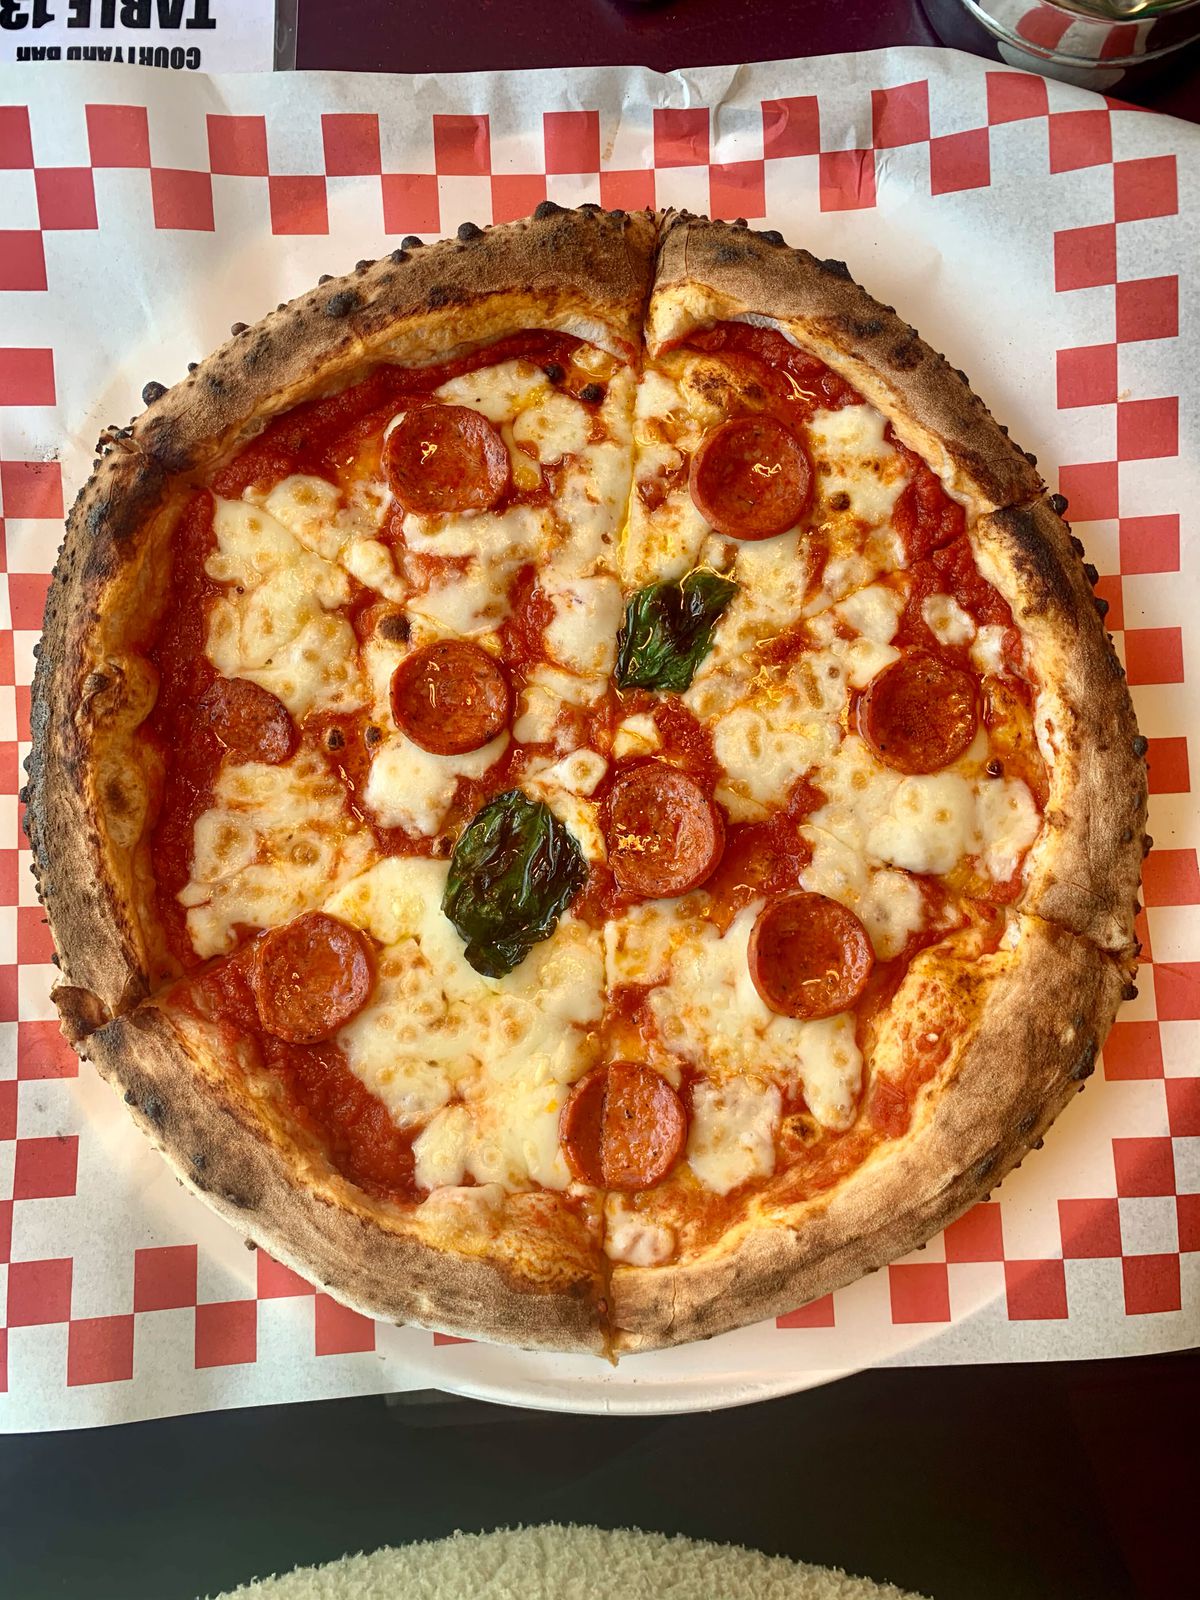 A classic pepperoni pizza on some classic red-and-white checkerboard paper